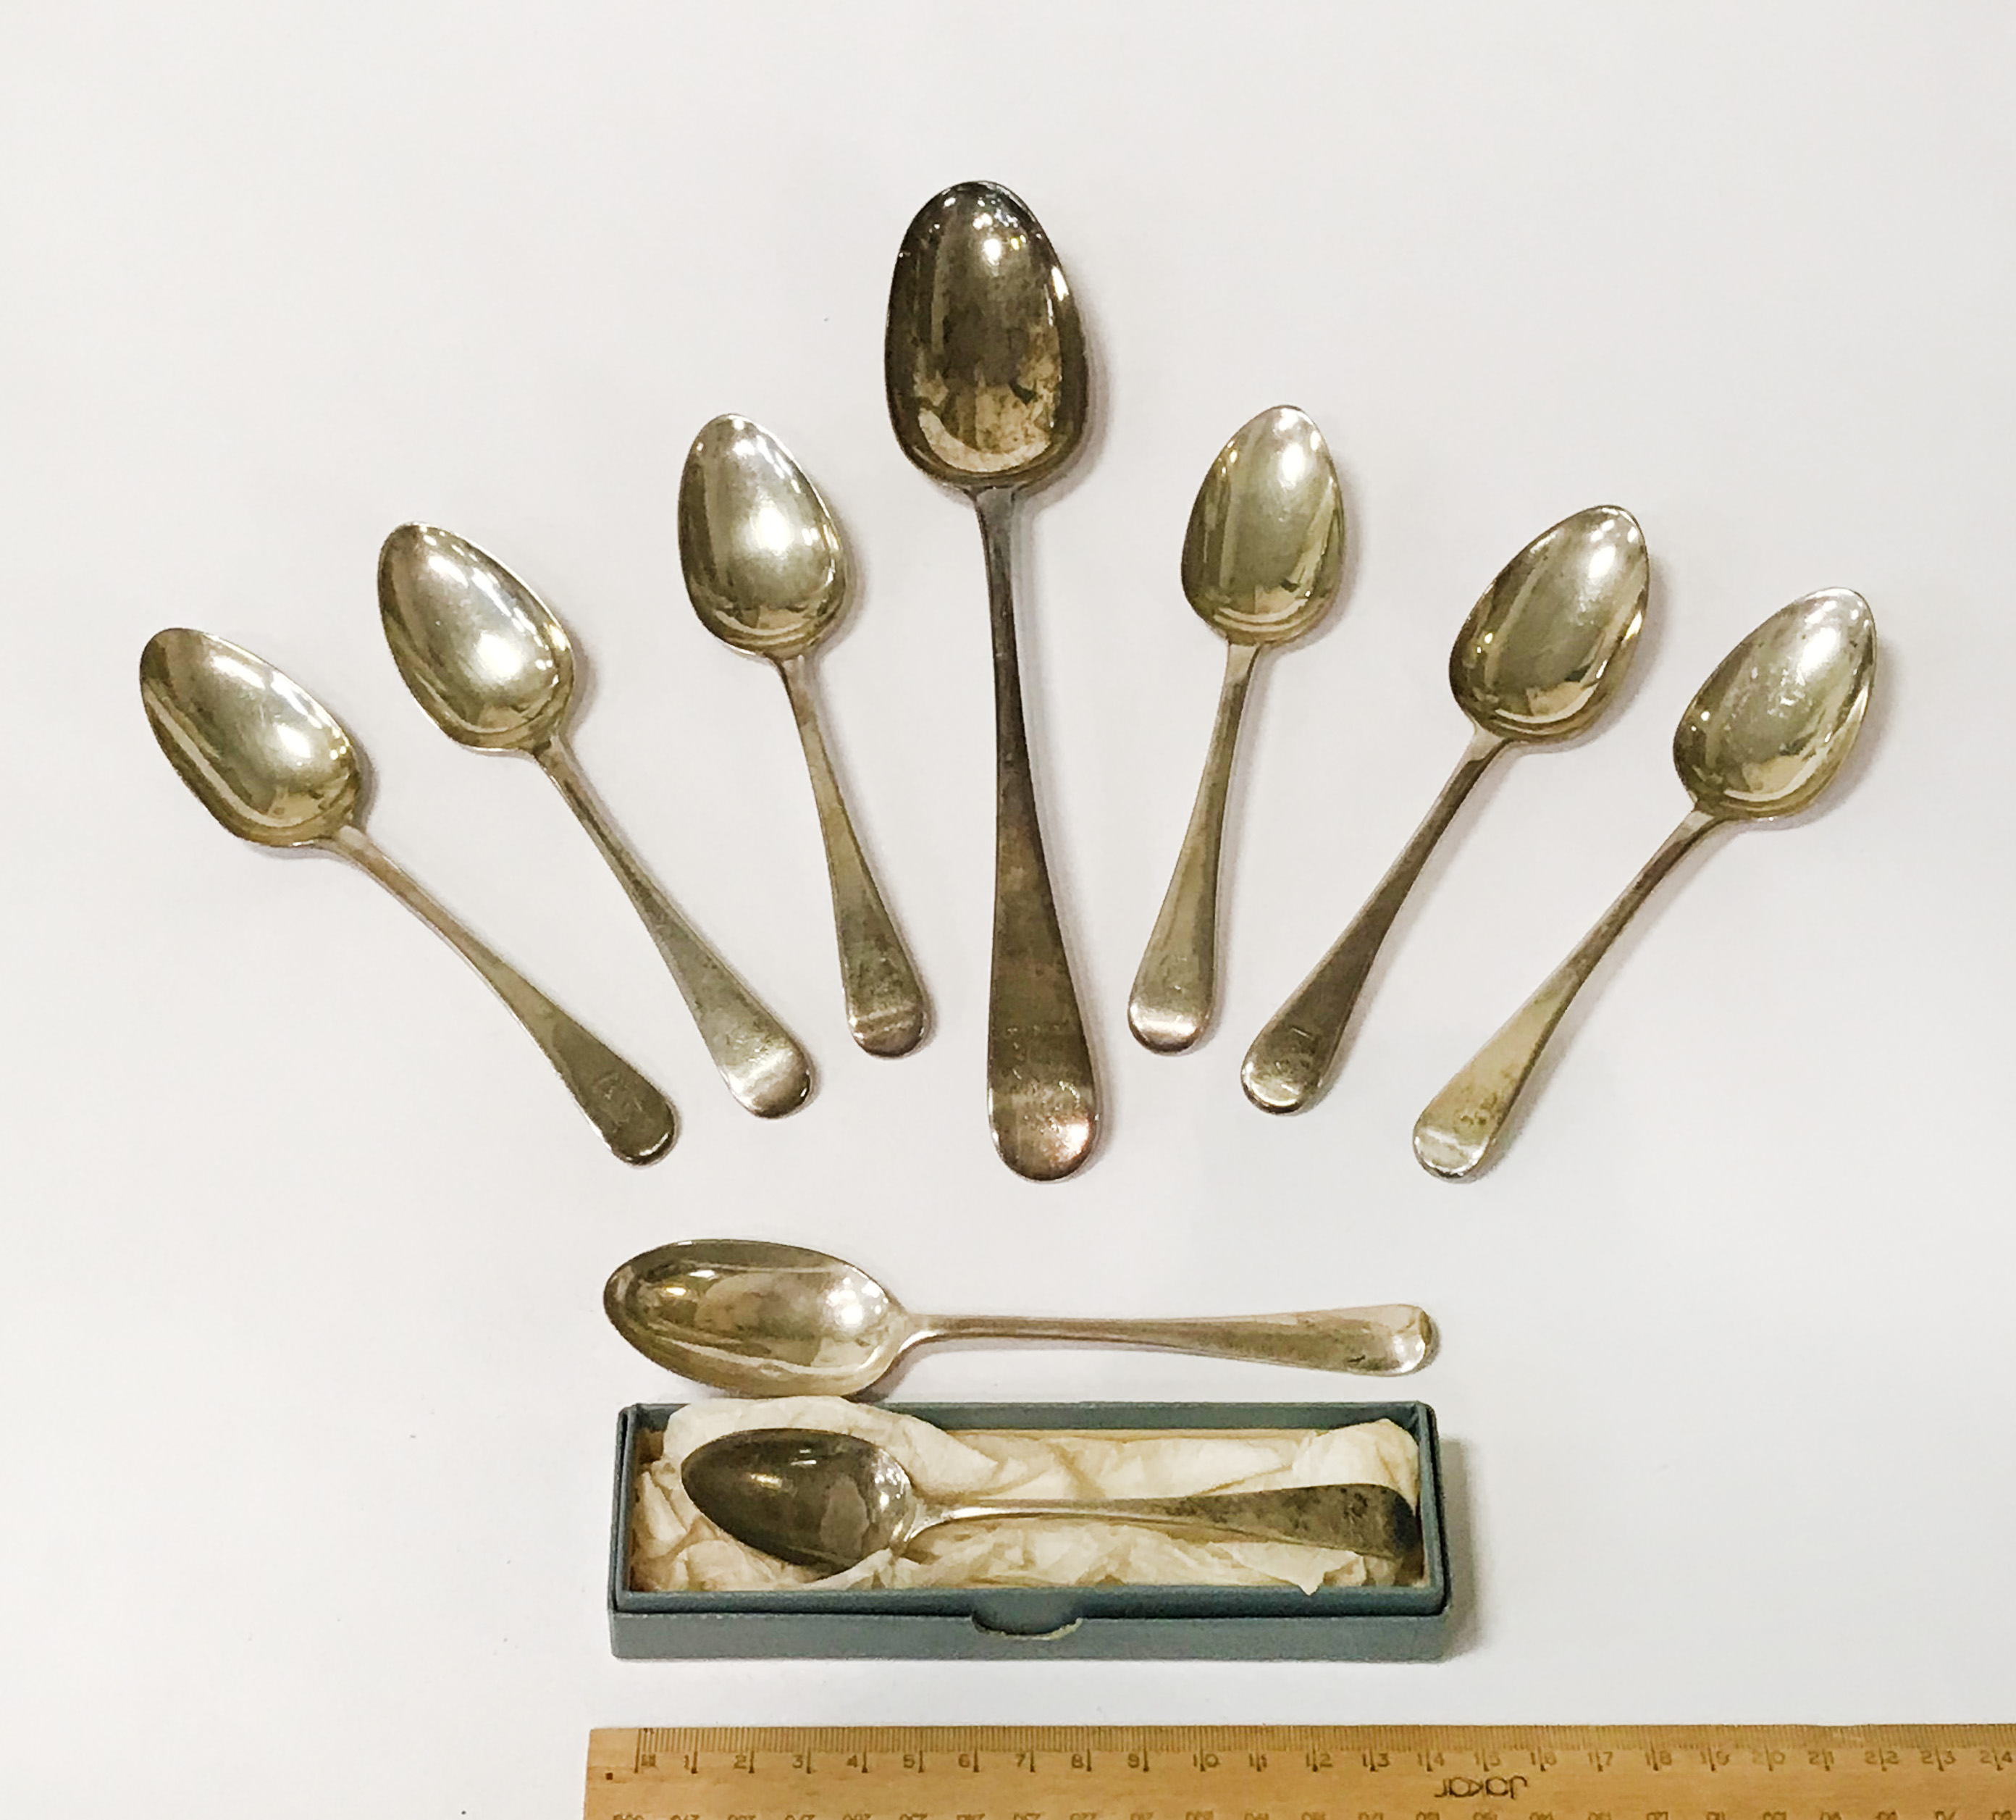 H/M SILVER GEORGIAN SERVING SPOON WITH 6 H/M SILVER GEORGIAN DESSERT SPOONS WITH 2 OTHER SPOONS OF A